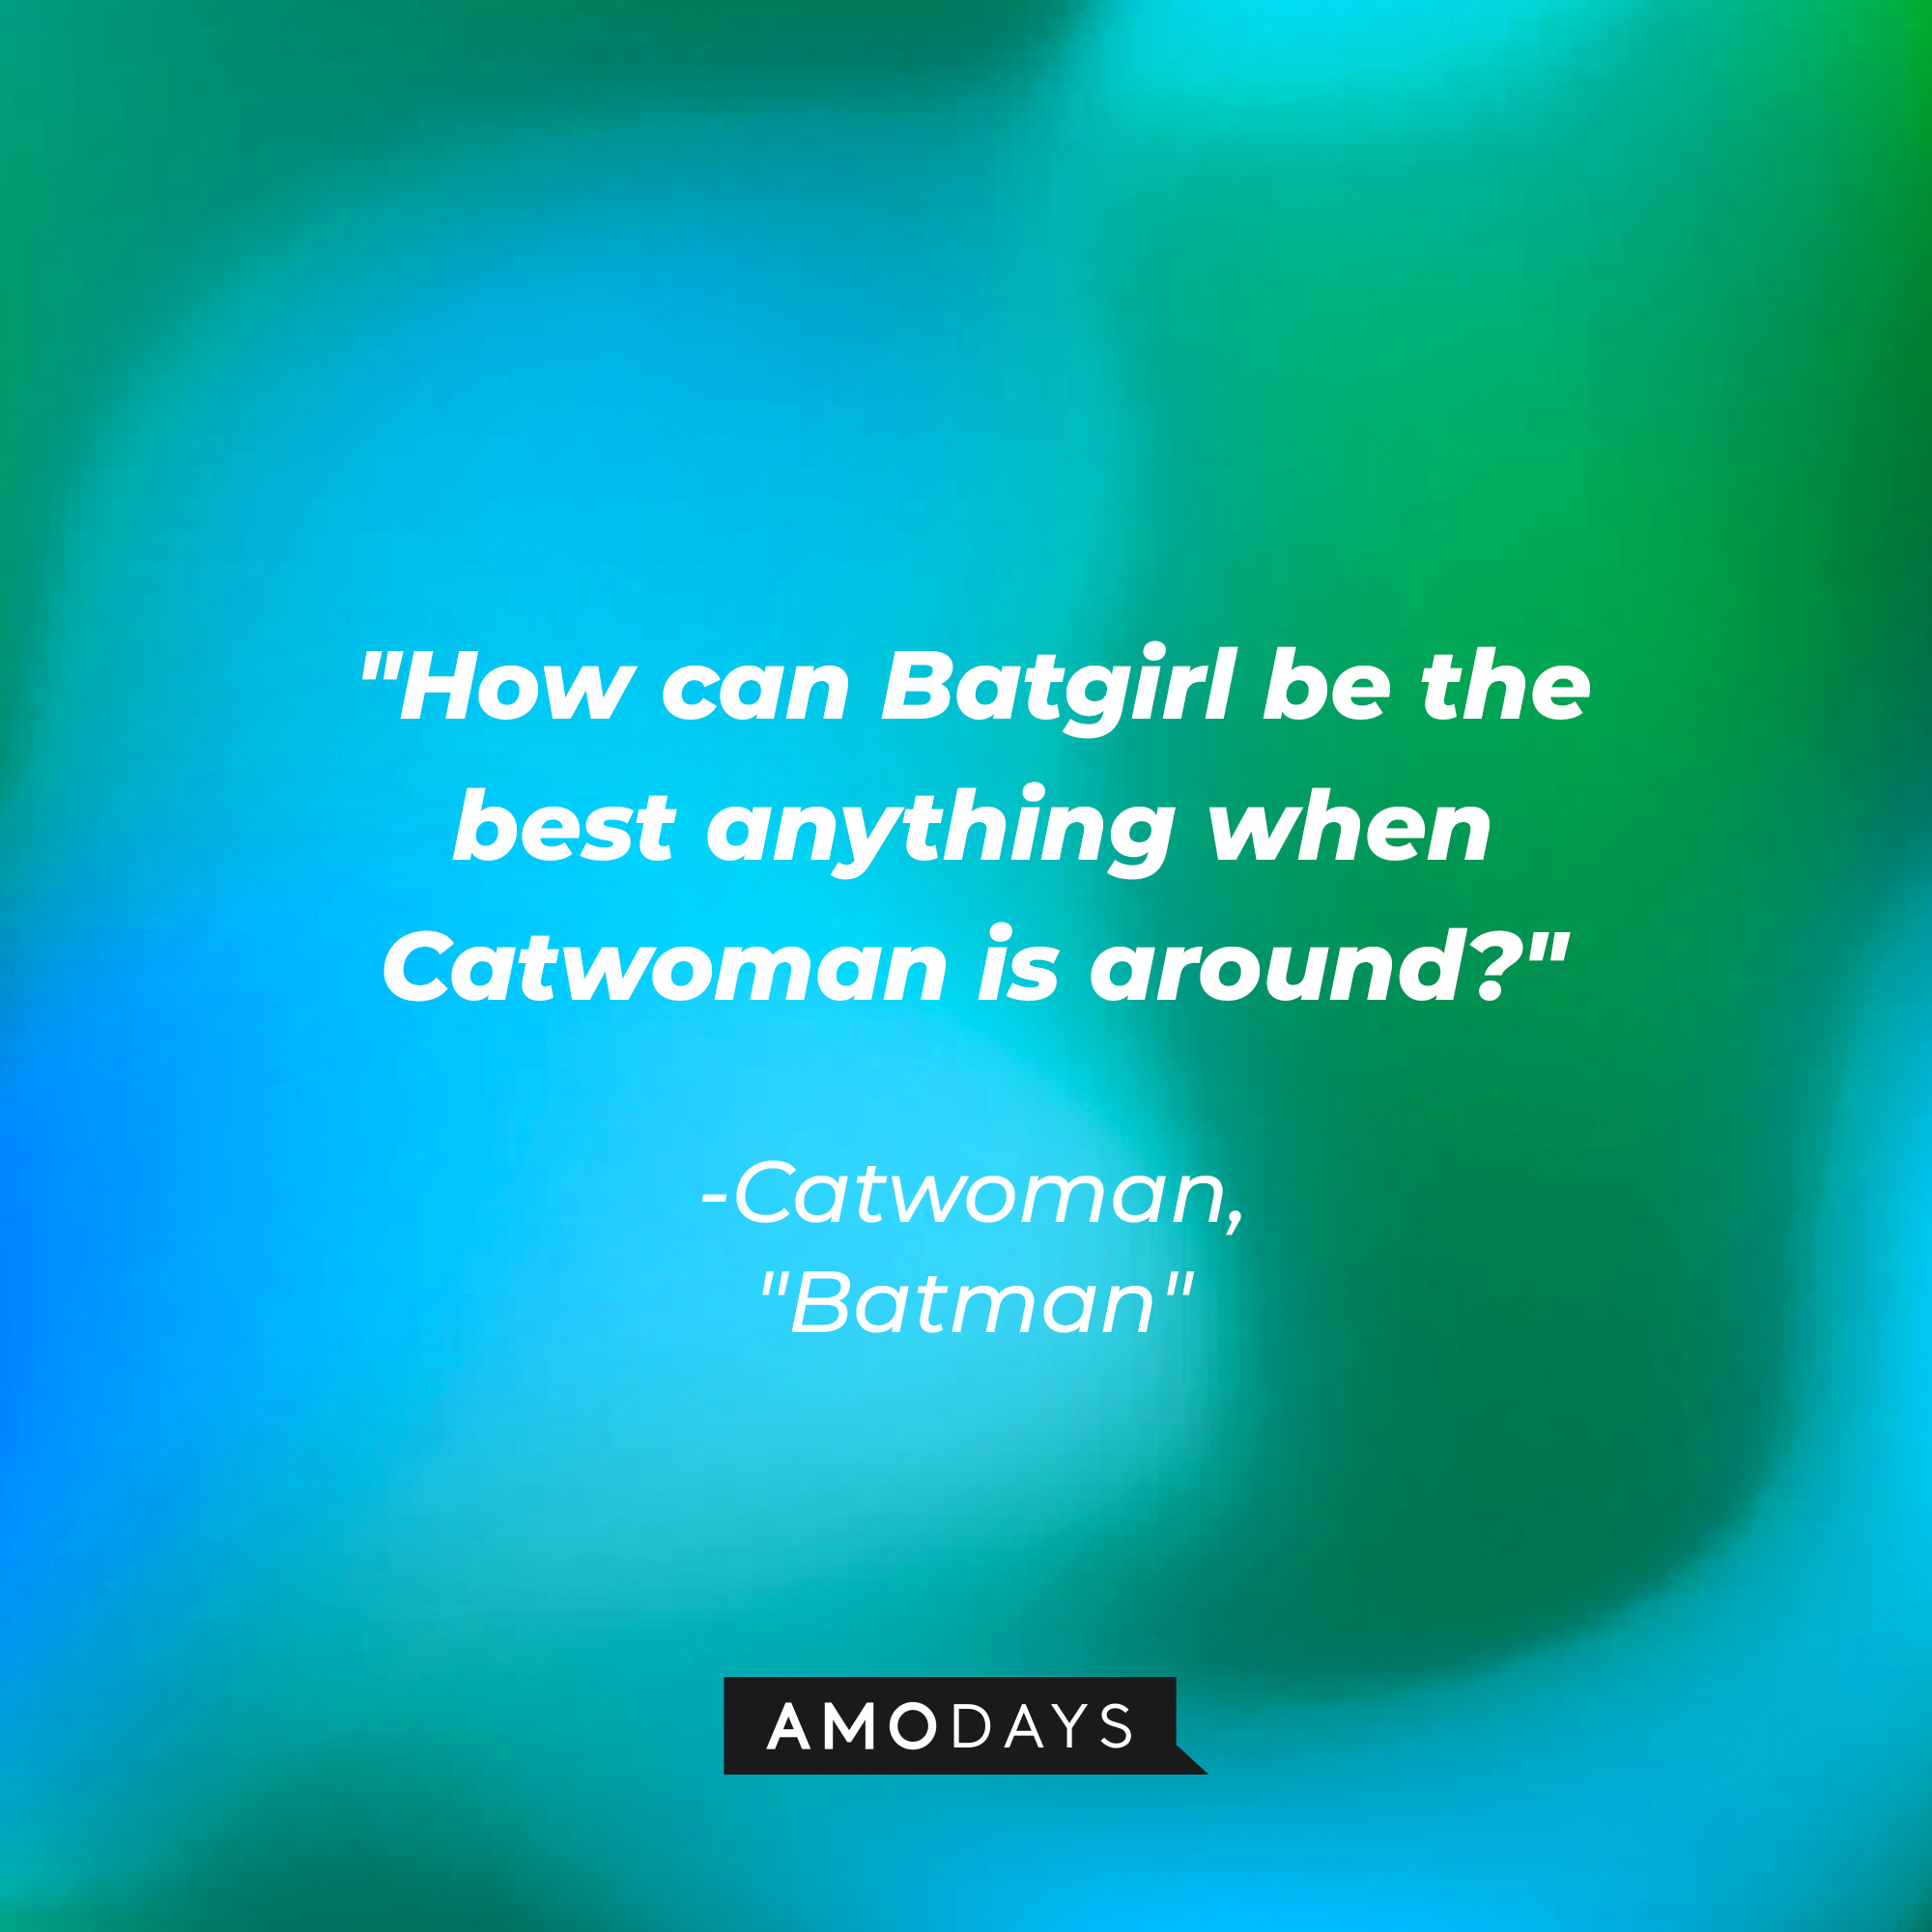 Catwoman’s quote: "How can Batgirl be the best anything when Catwoman is around?" | Image: AmoDays